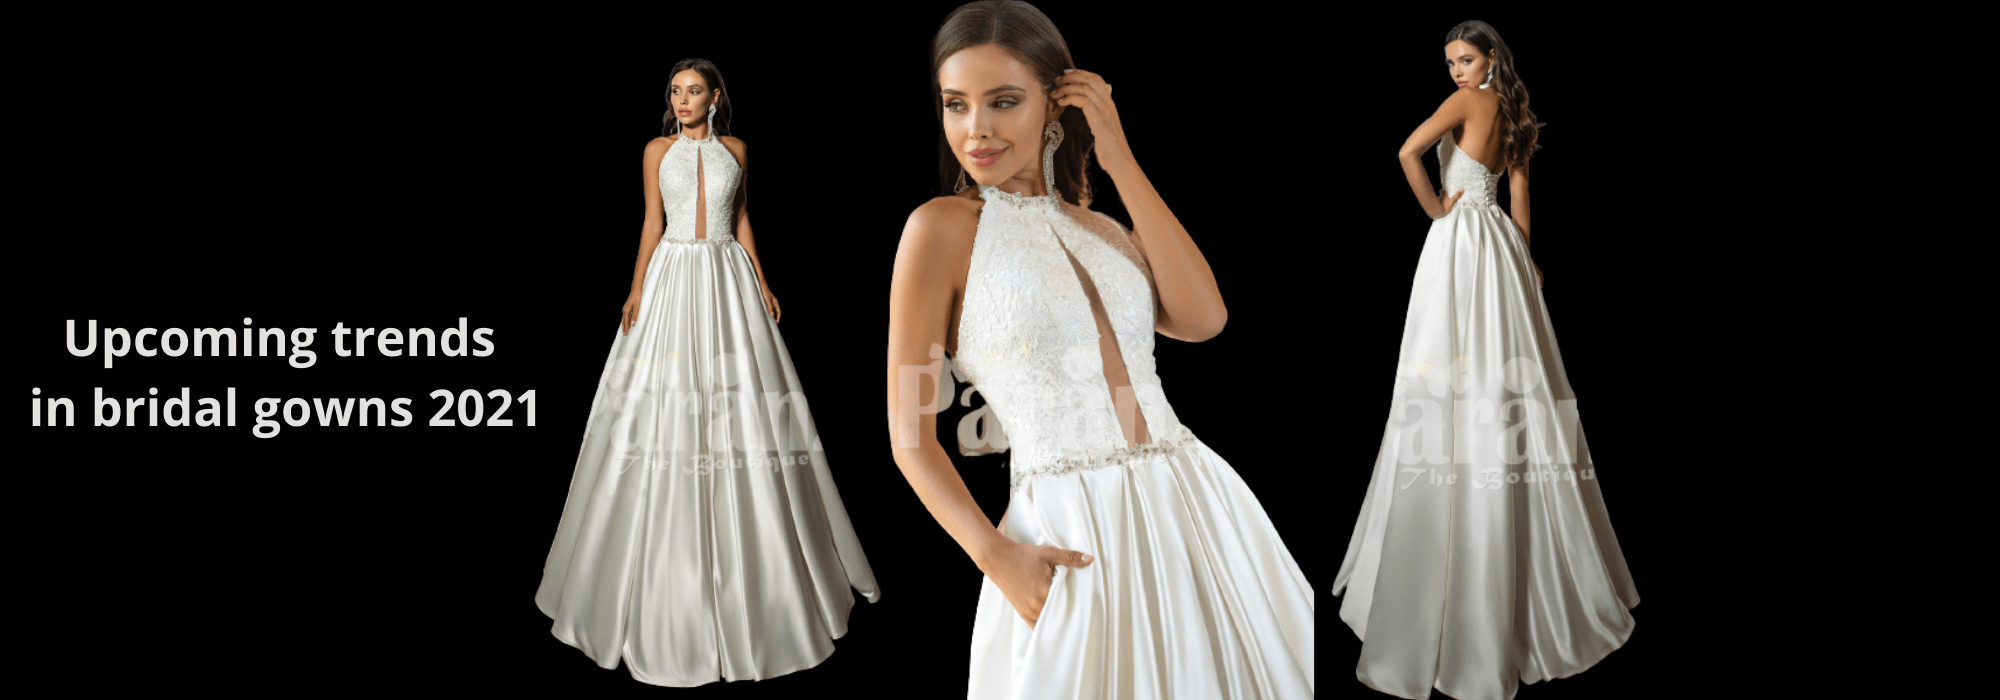 UPCOMING TRENDS IN BRIDAL GOWNS 2021